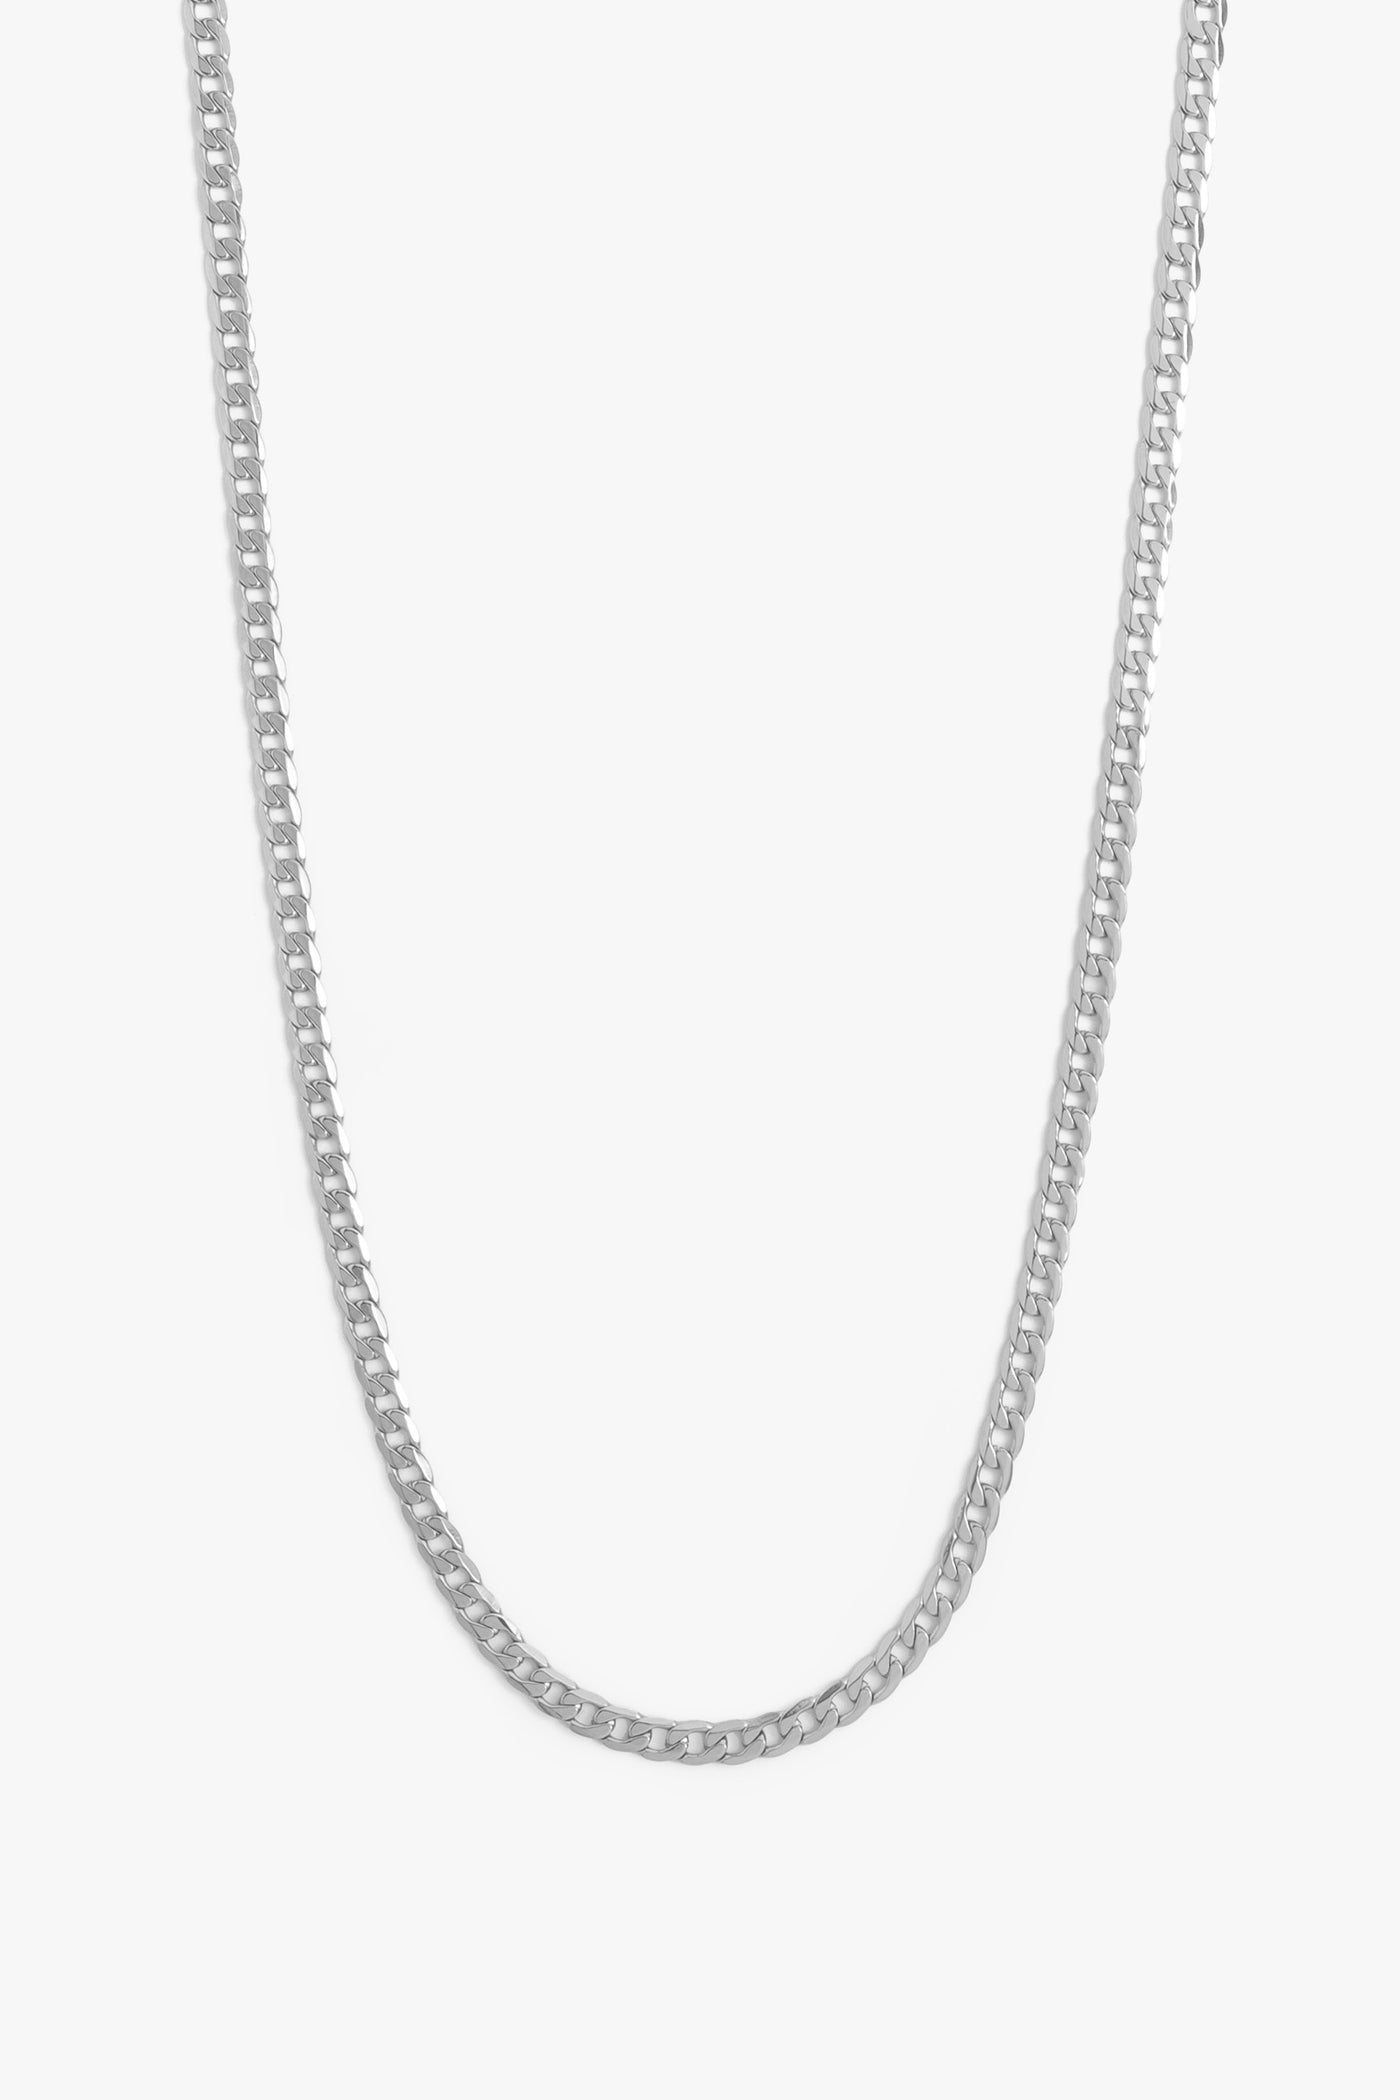 Marrin Costello Jewelry Callie 24 Inch Chain small cuban link chain with lobster clasp closure.Waterproof, sustainable, hypoallergenic. Polished stainless steel.